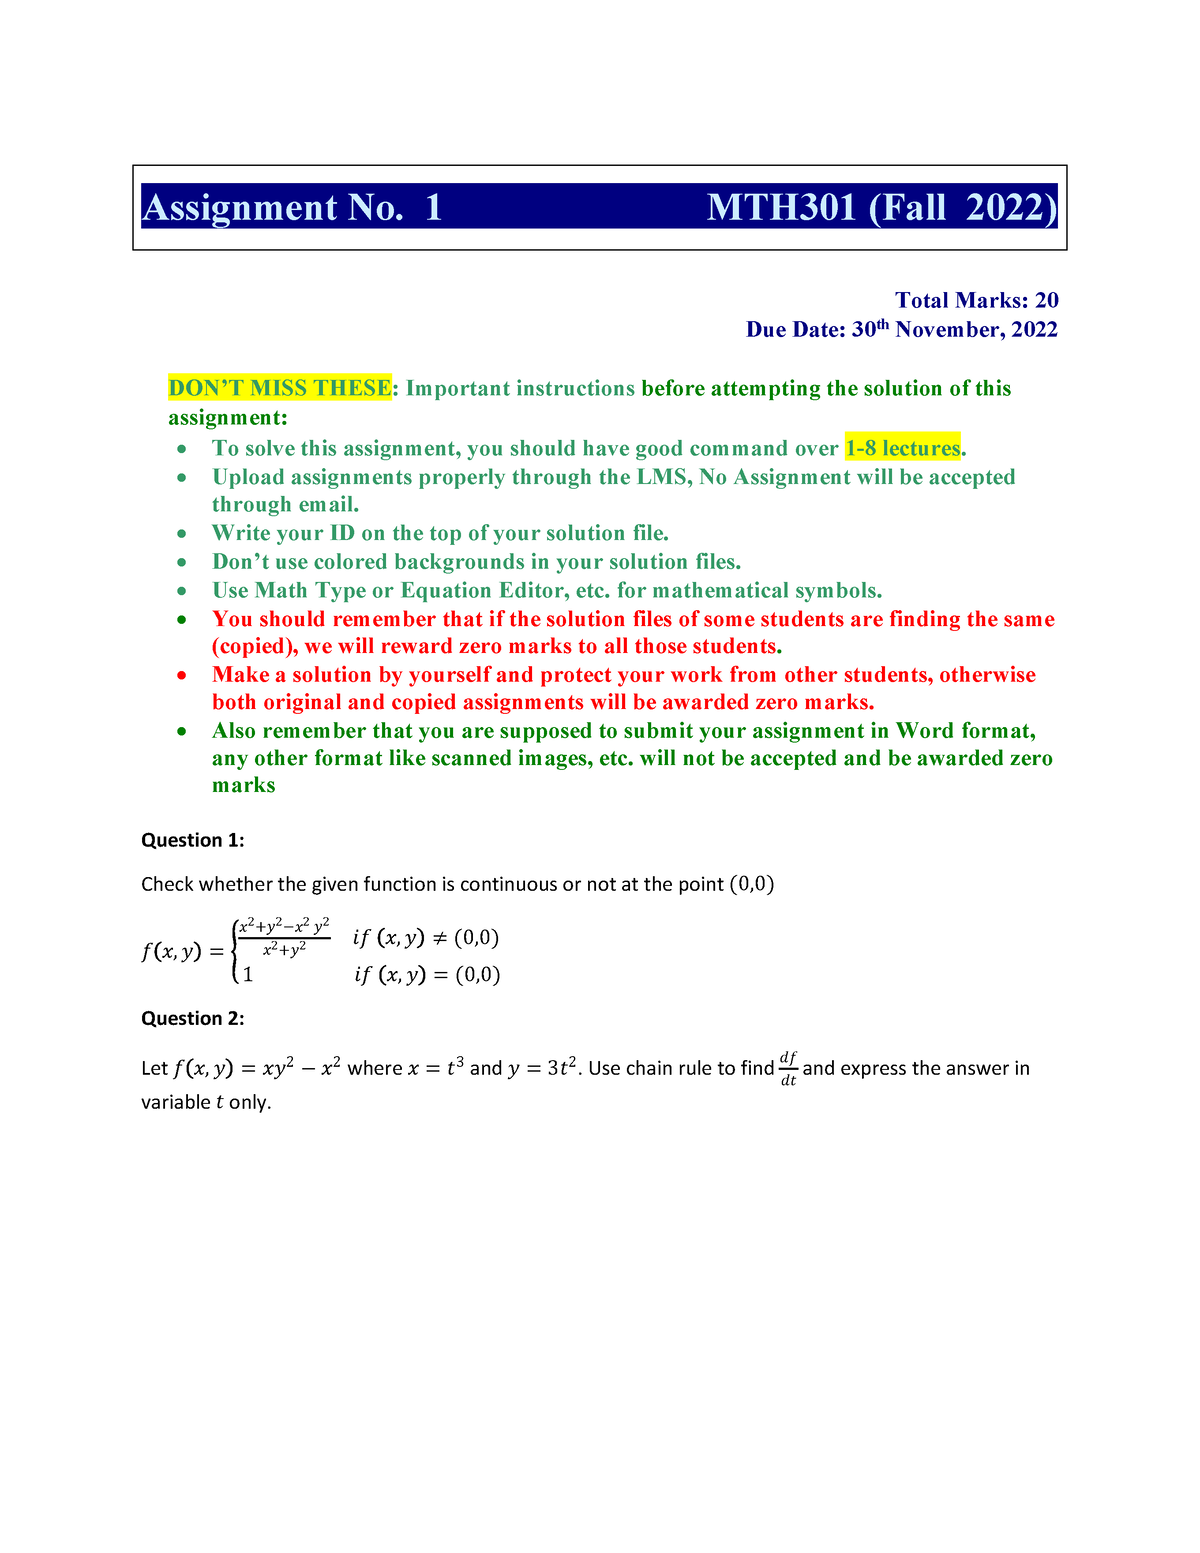 mth301 assignment 1 solution 2022 pdf